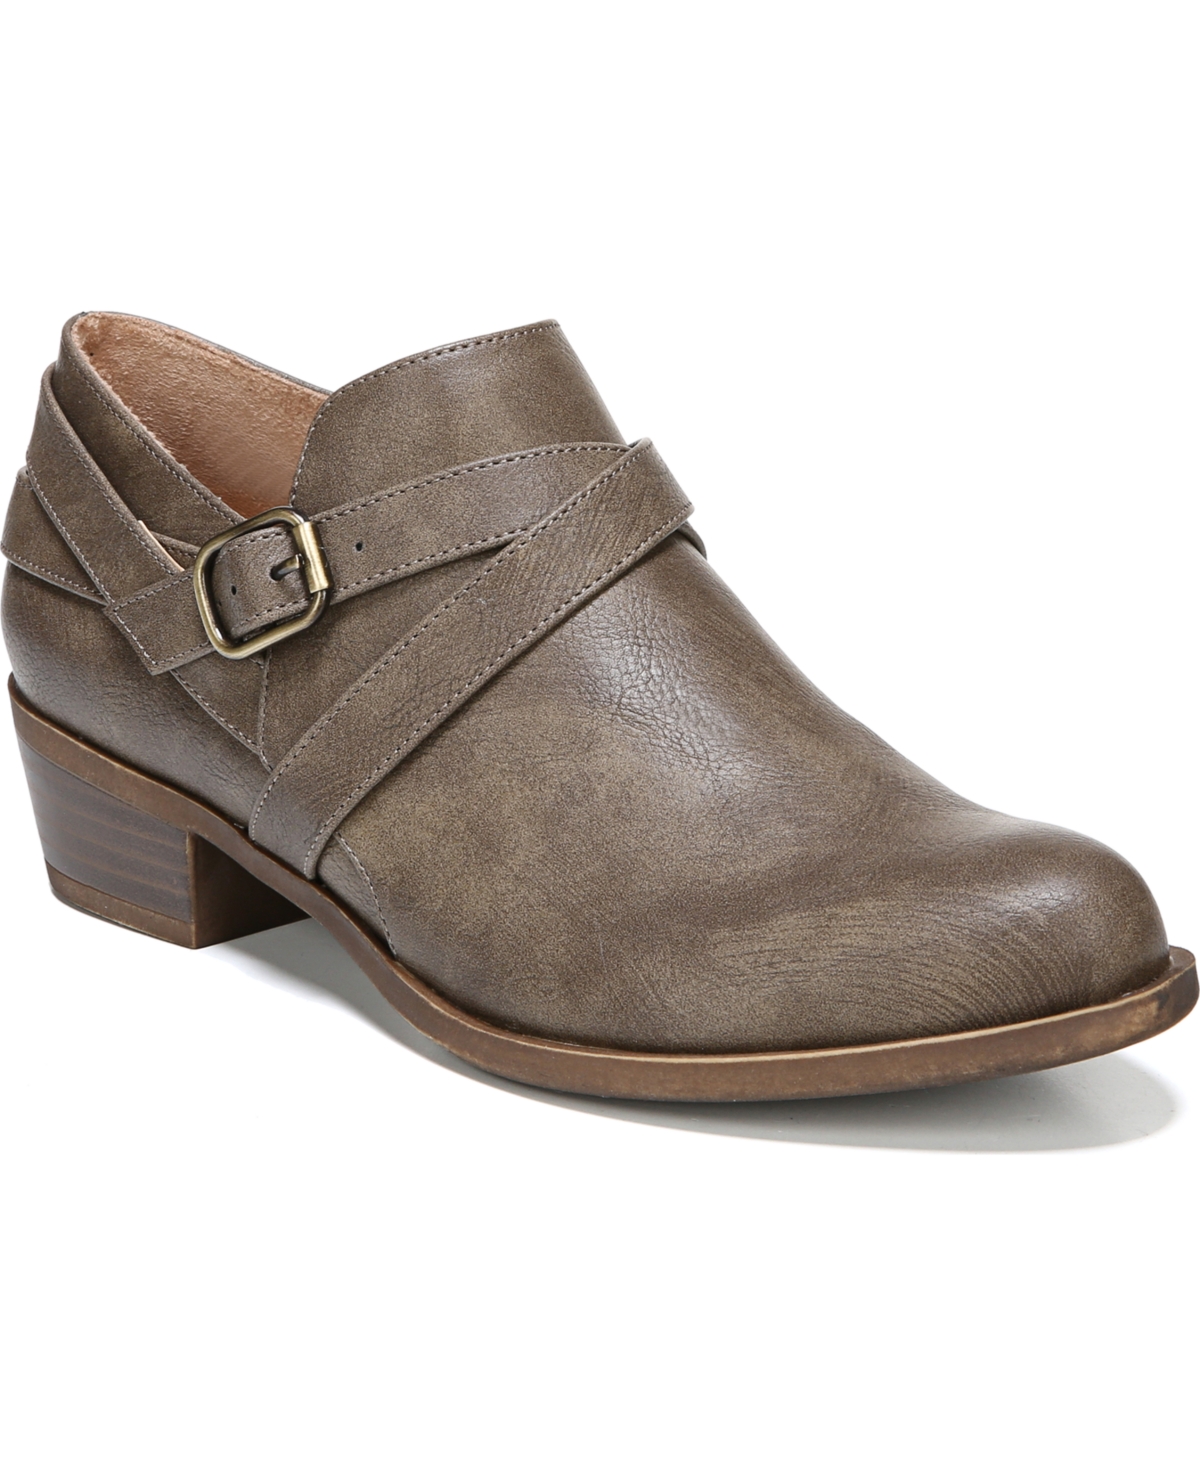 Adley Shooties - Taupe Faux Leather